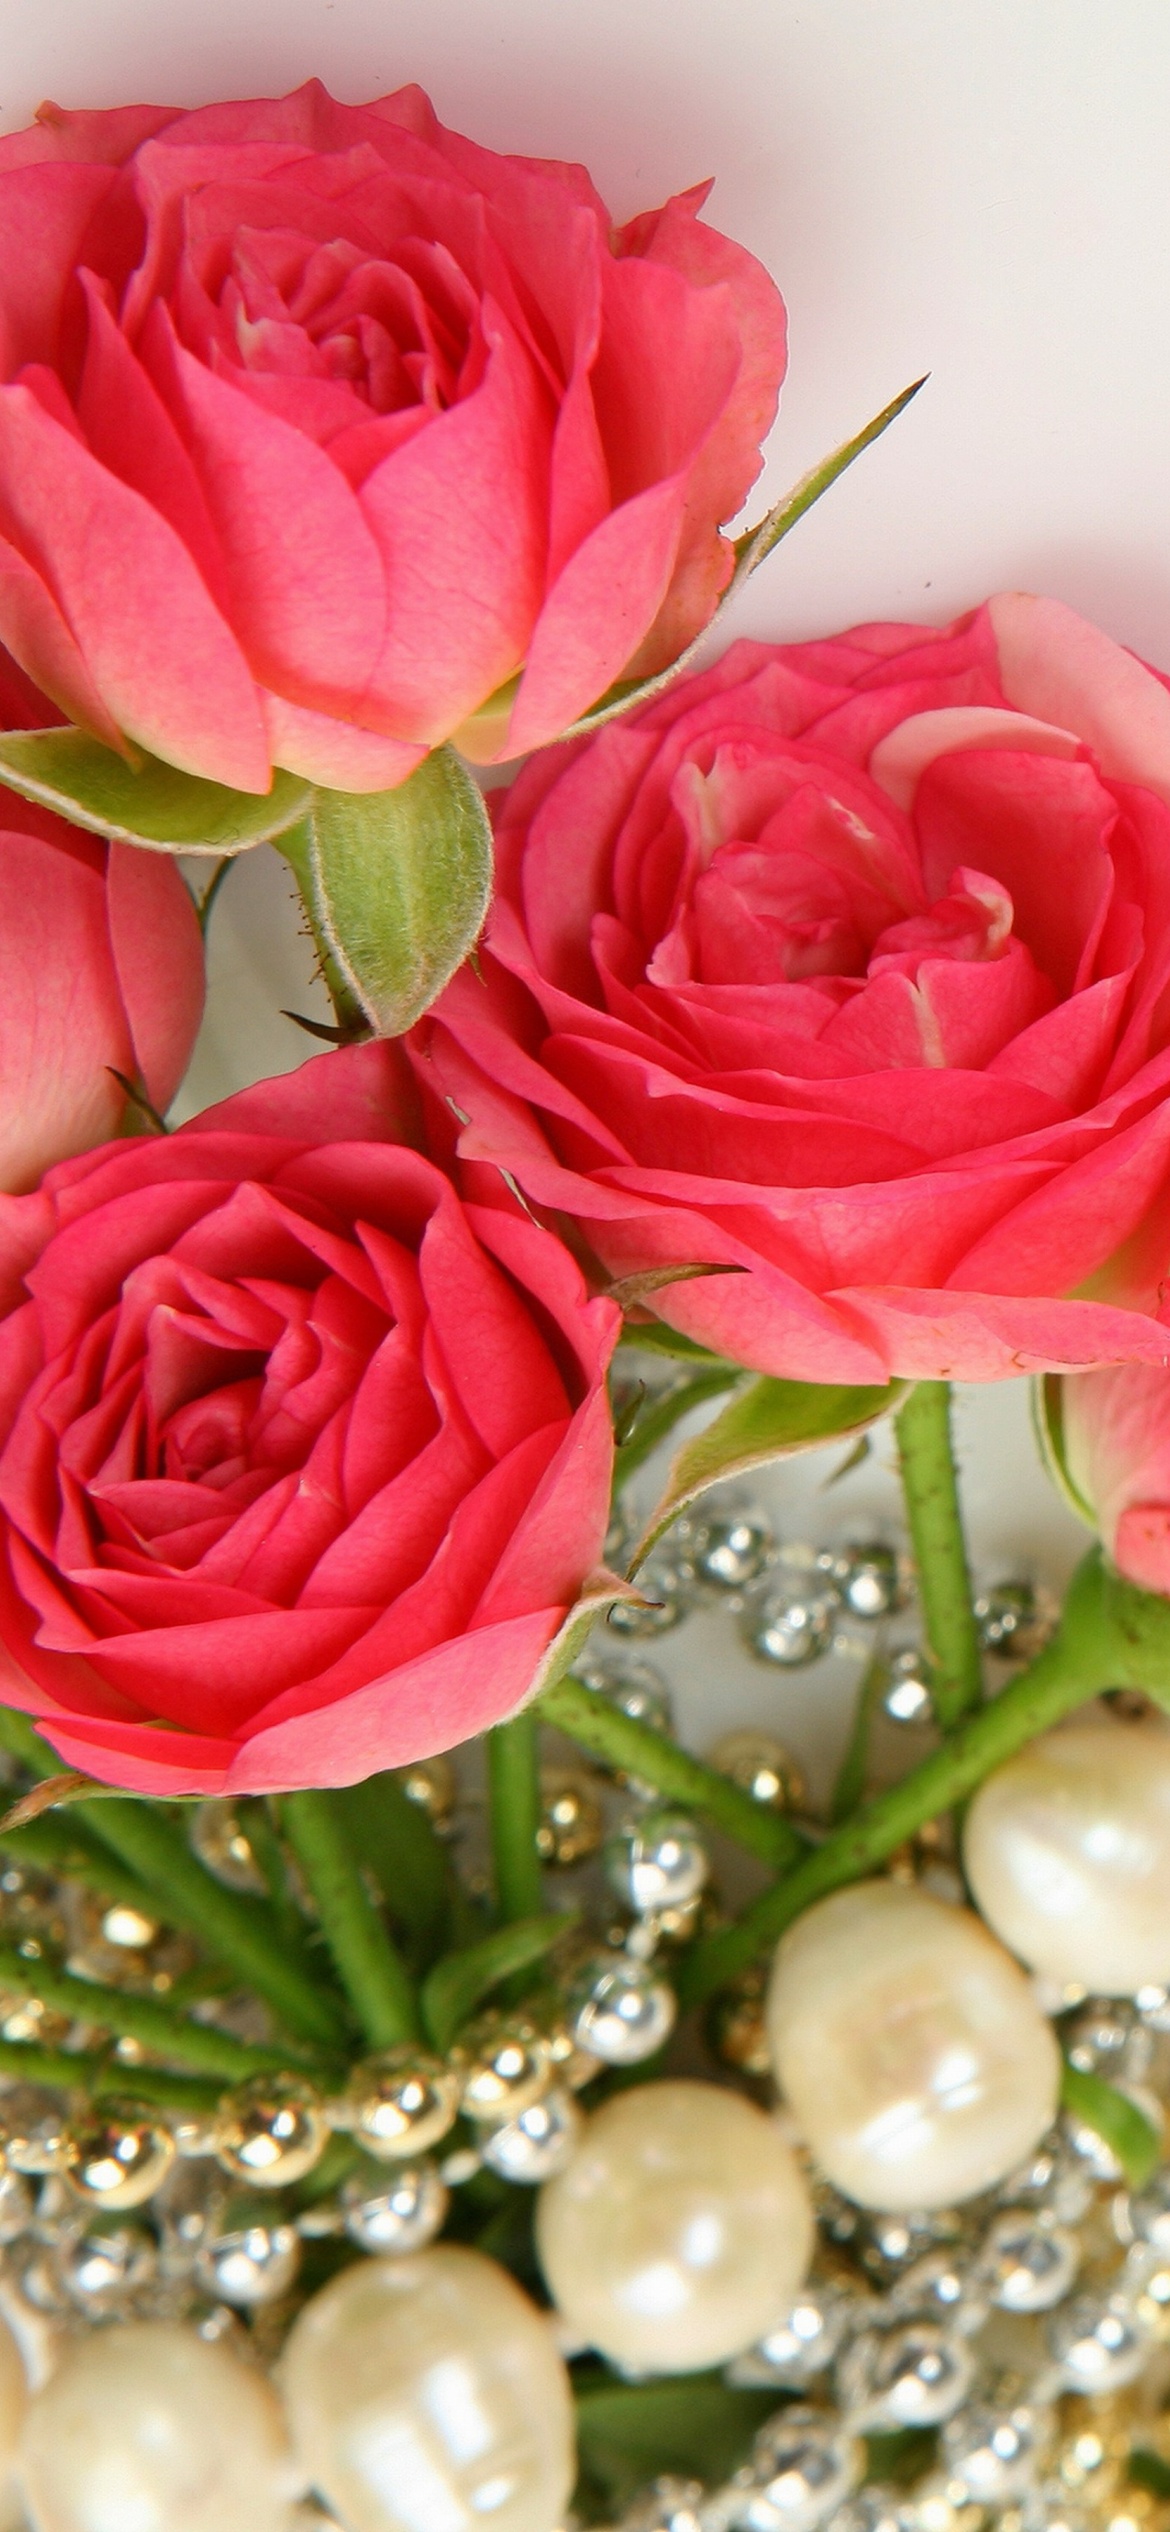 Necklace and Roses Bouquet wallpaper 1170x2532